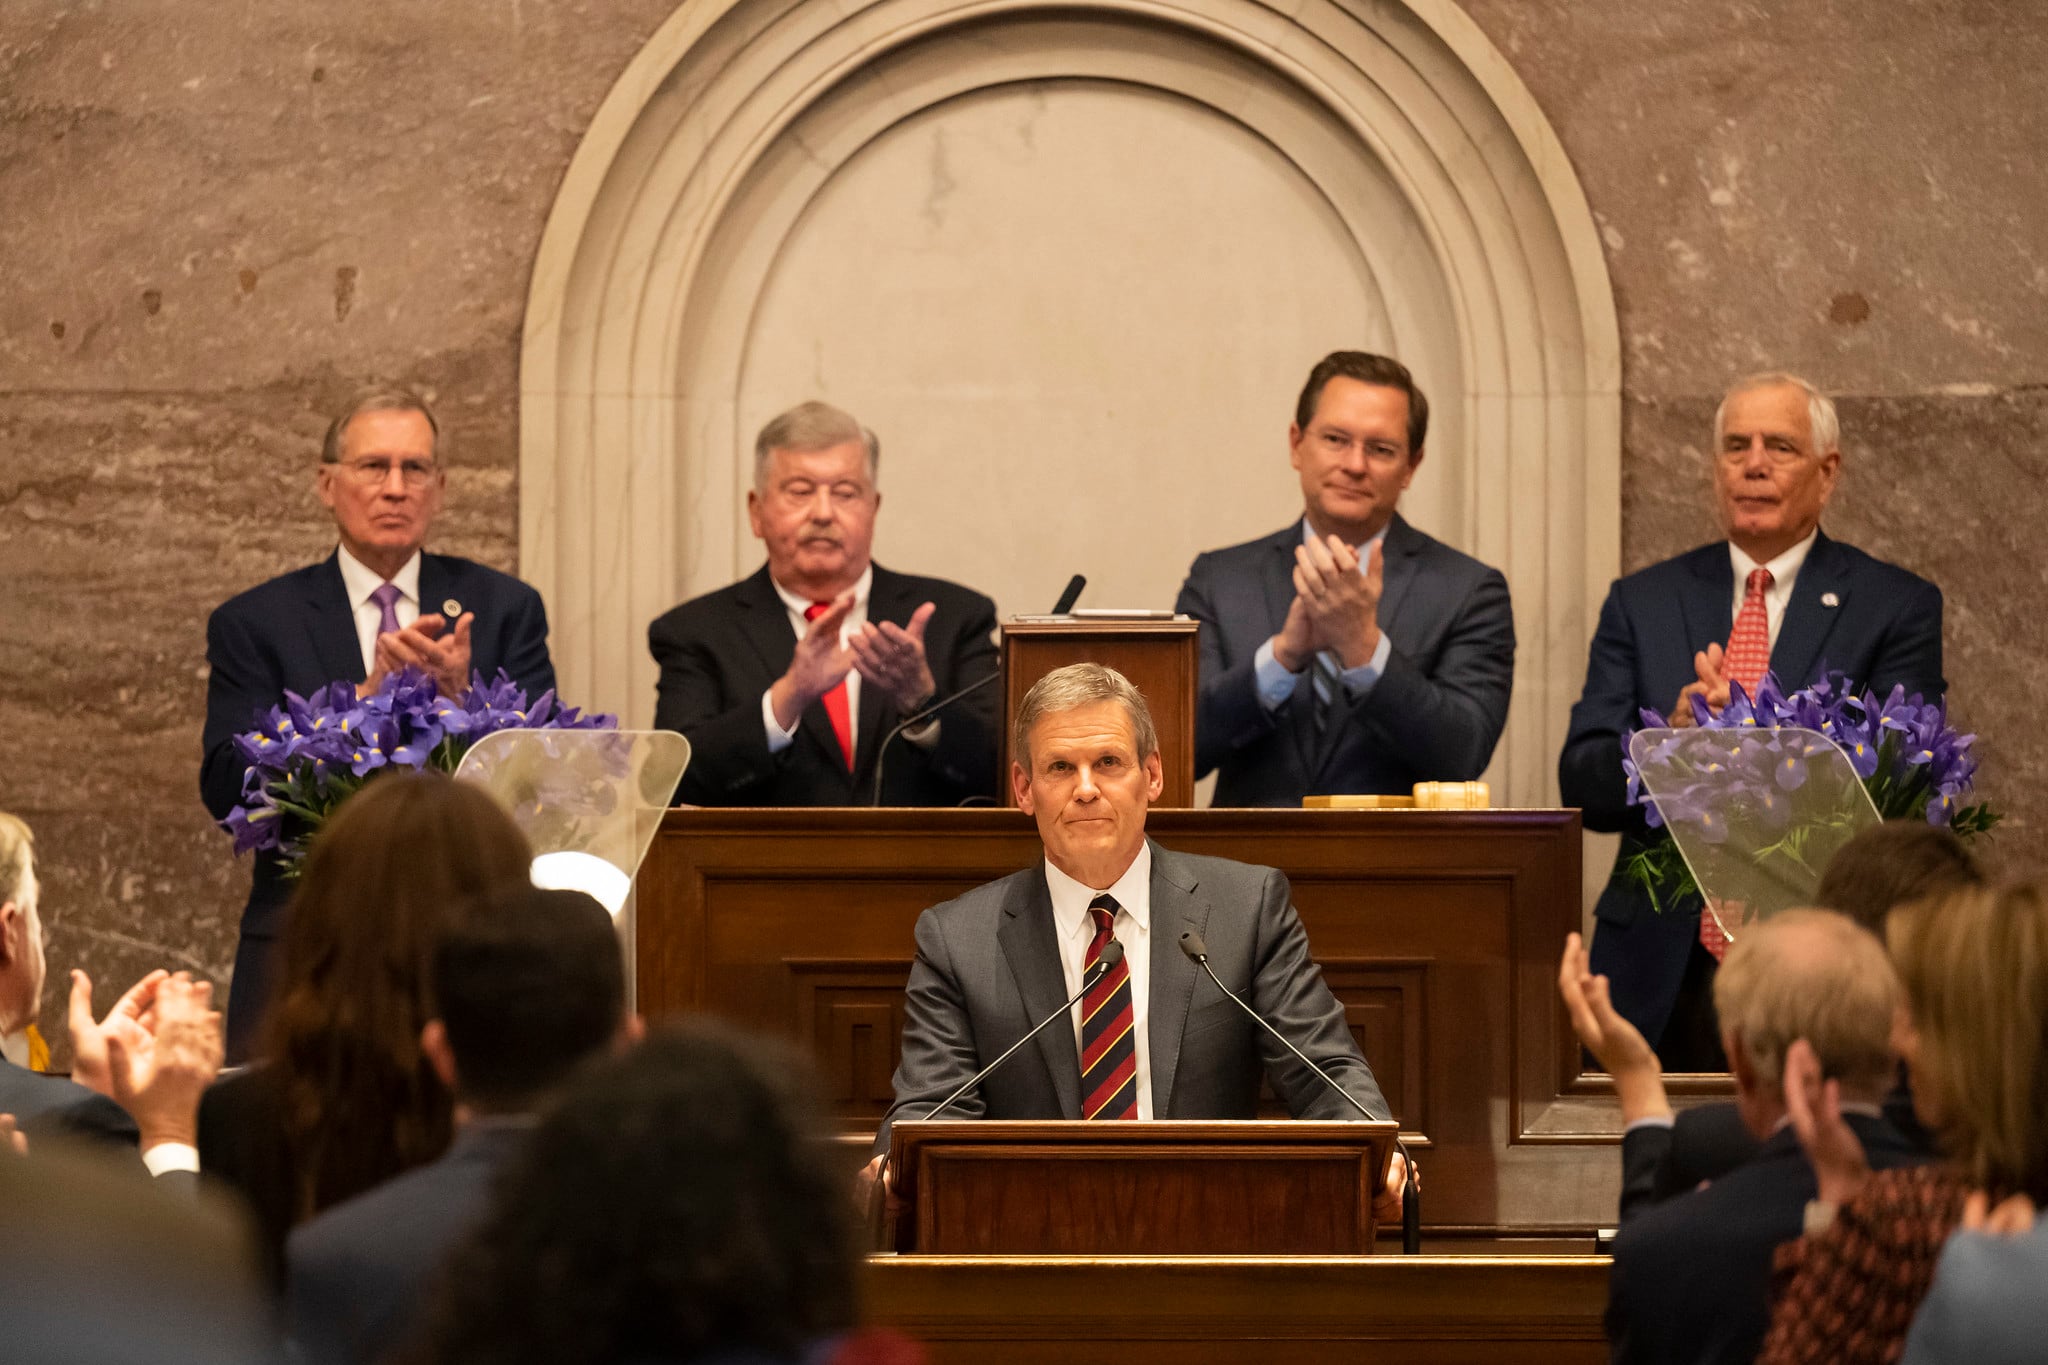 A man in a business suit stands at a podium surrounded by other men who are clapping.